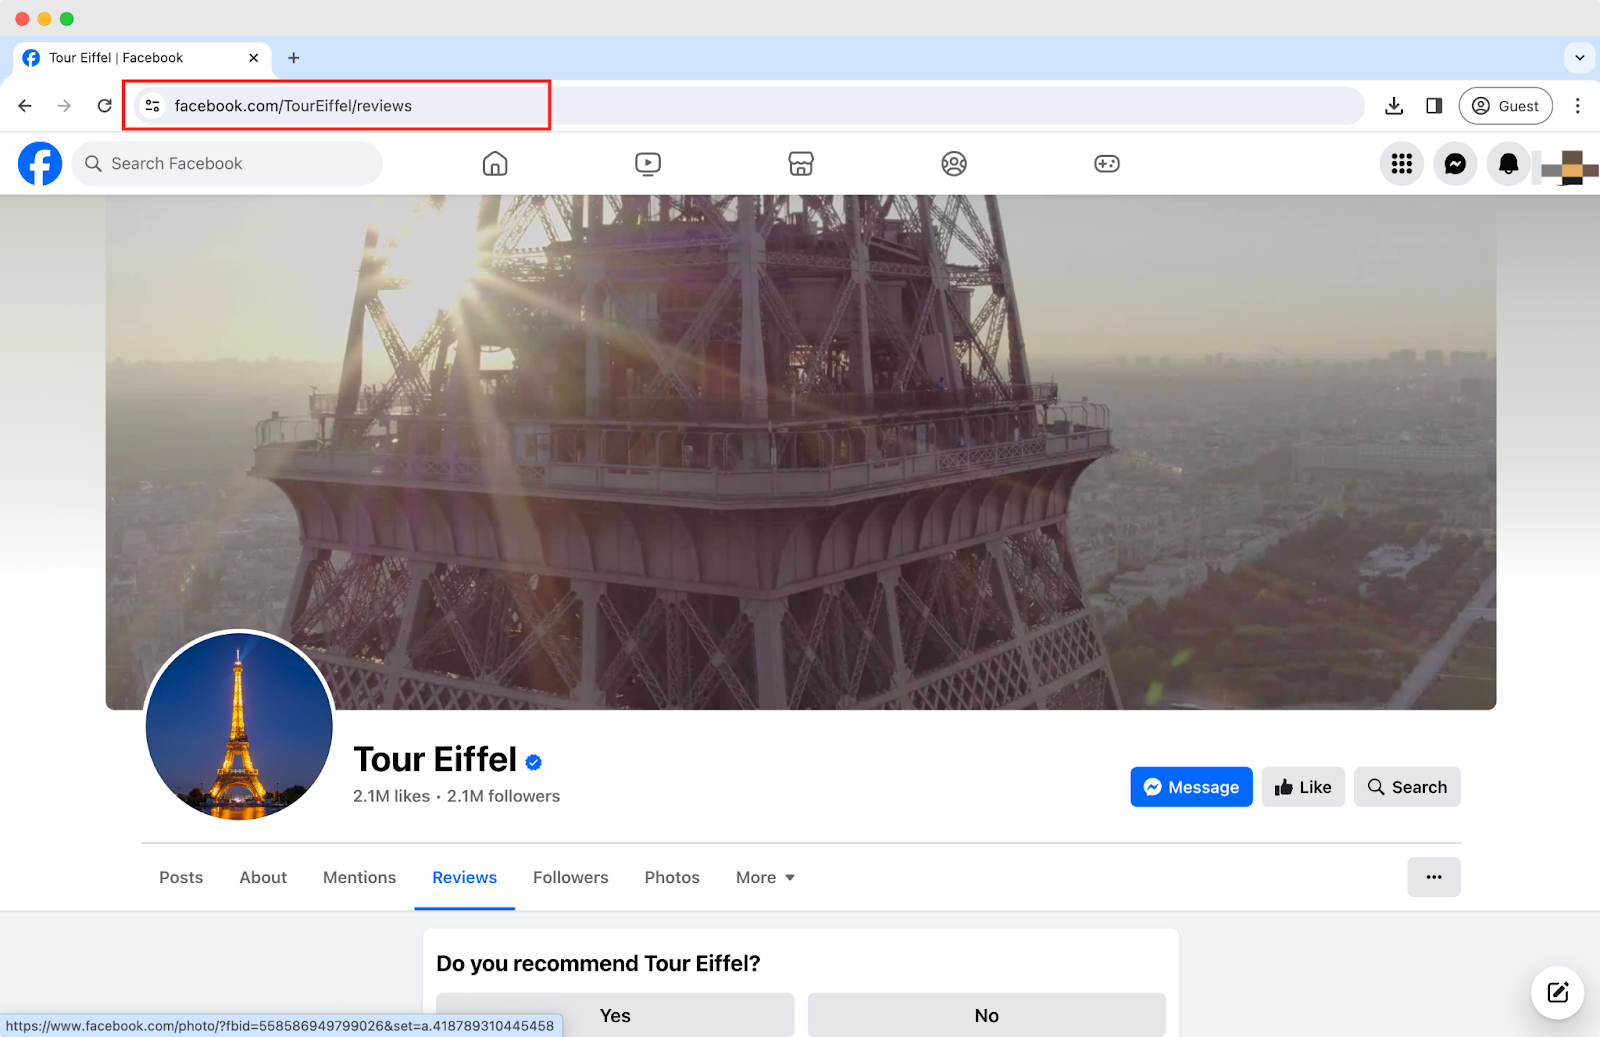 How To Find & Add Review Link For Facebook?